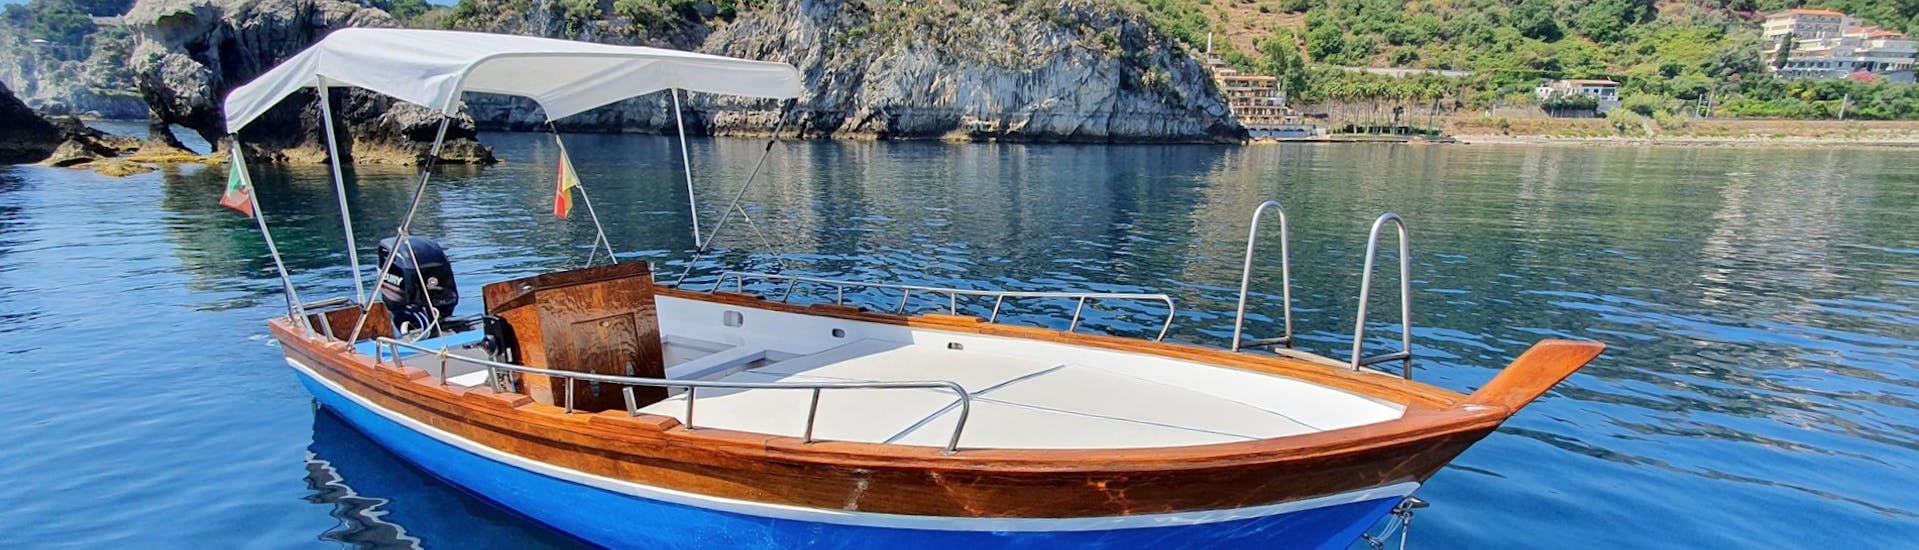 Picture of the boat used for the Boat Trip along the Coast of Taormina with Snorkeling with Boat Experience Taormina.